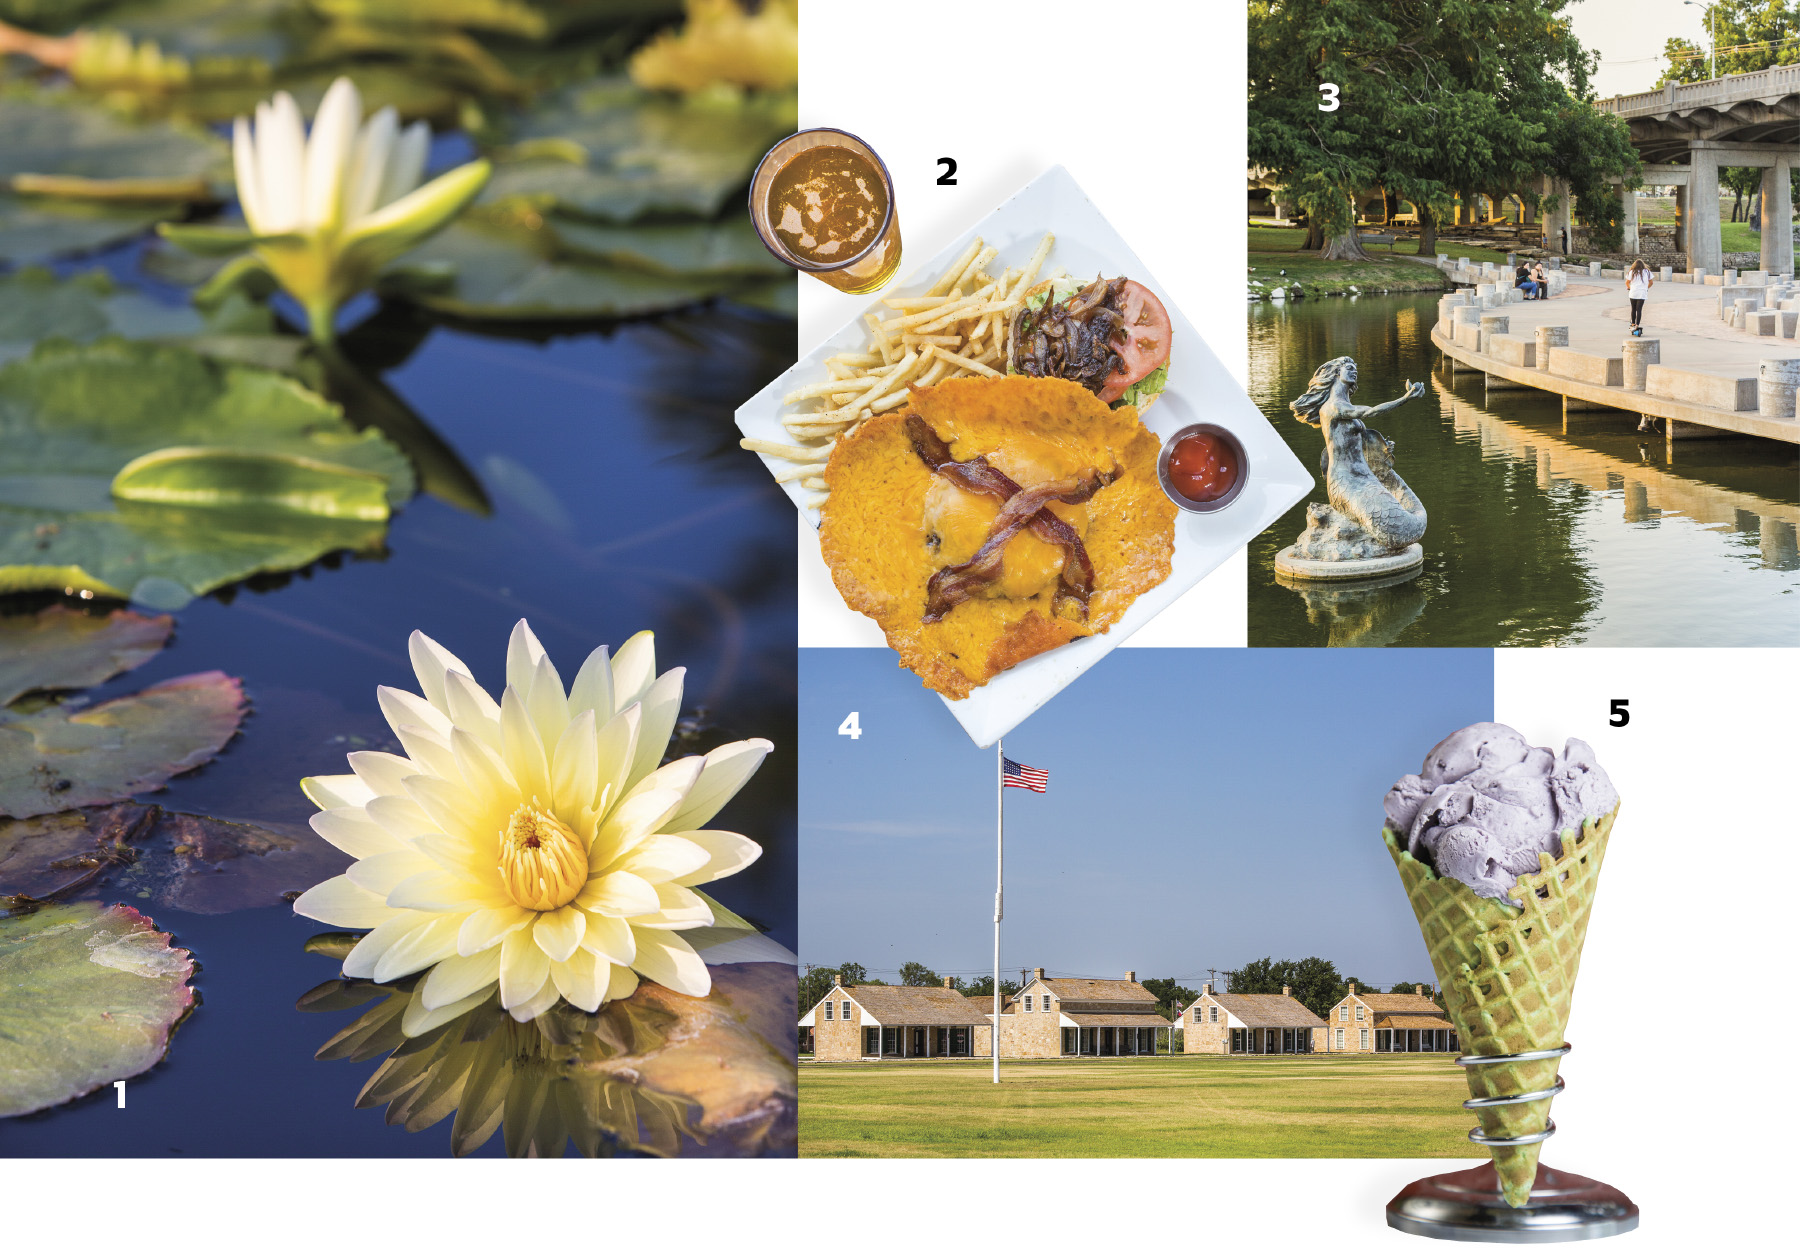 A collage of items from San Angelo, including flowers growing on water lillies, a plate of food with beer, a statue in water, military fort, and an ice cream cone